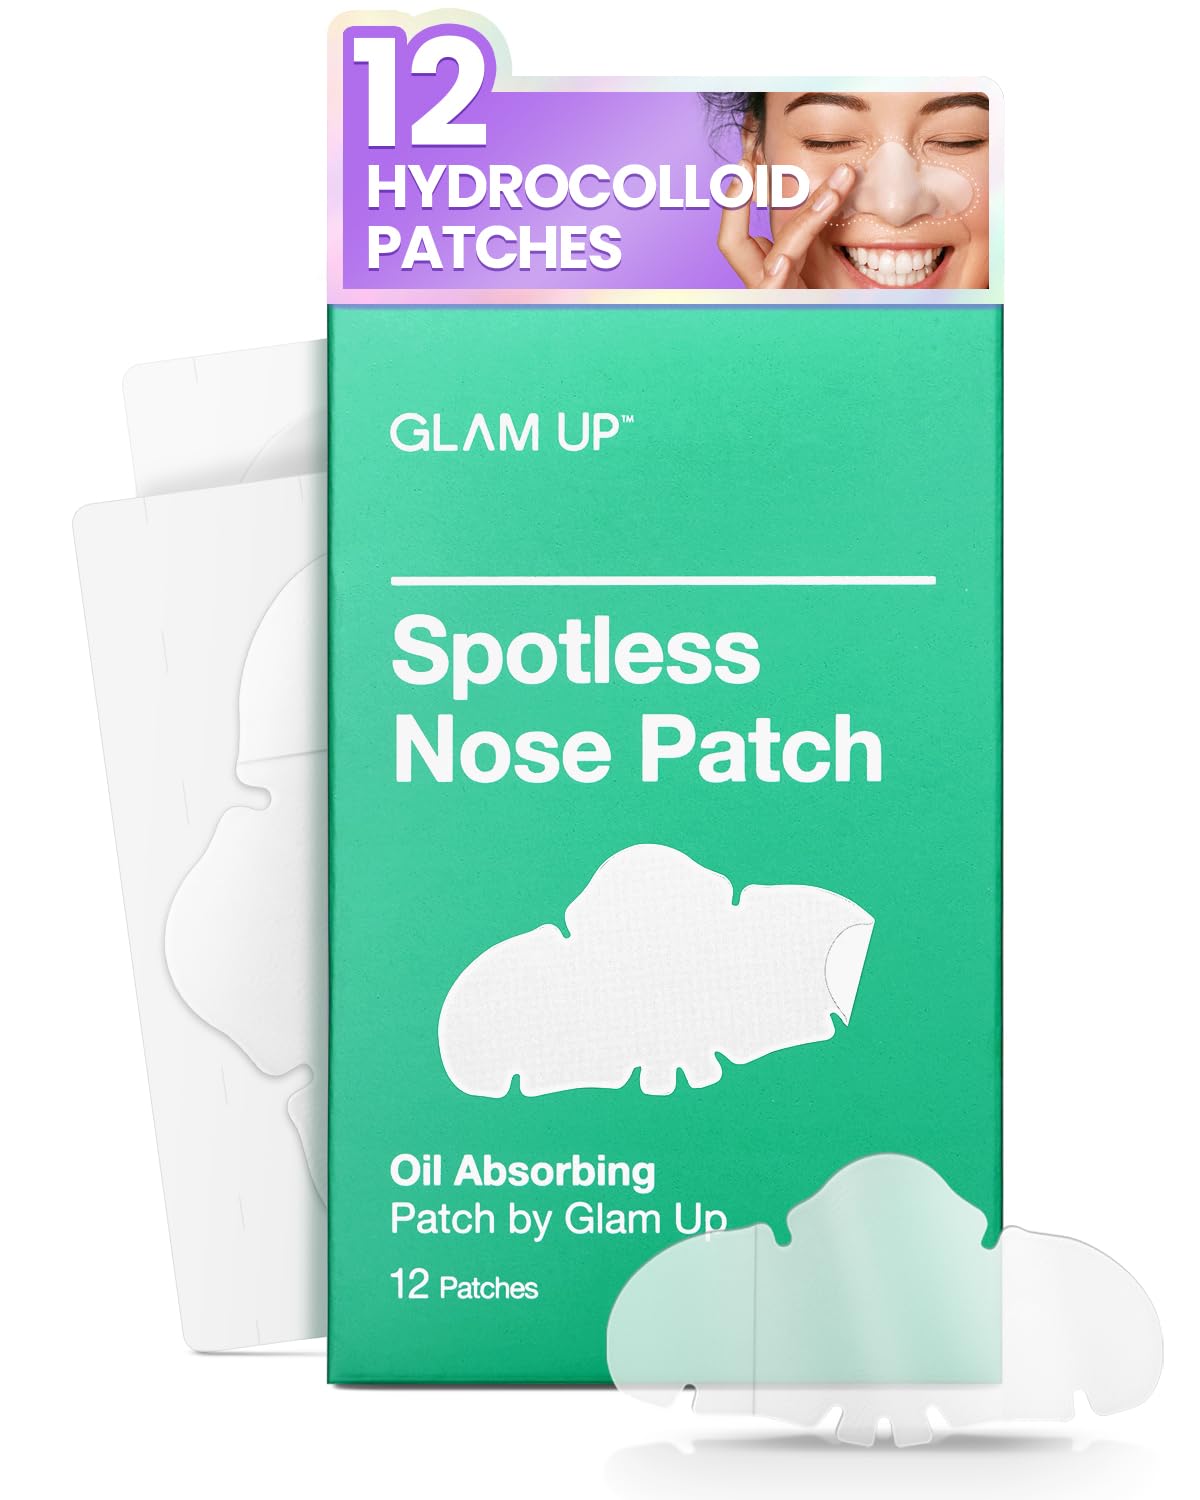 GLAM UP Spotless Nose Patch Hydrocolloid Coverage for Nose Pores, Zits and Oil - Overnight Strong Waterproof to Absorb Blackheads & Pimple Nose Gunk, and Calm with Tea Tree (12 Patches)